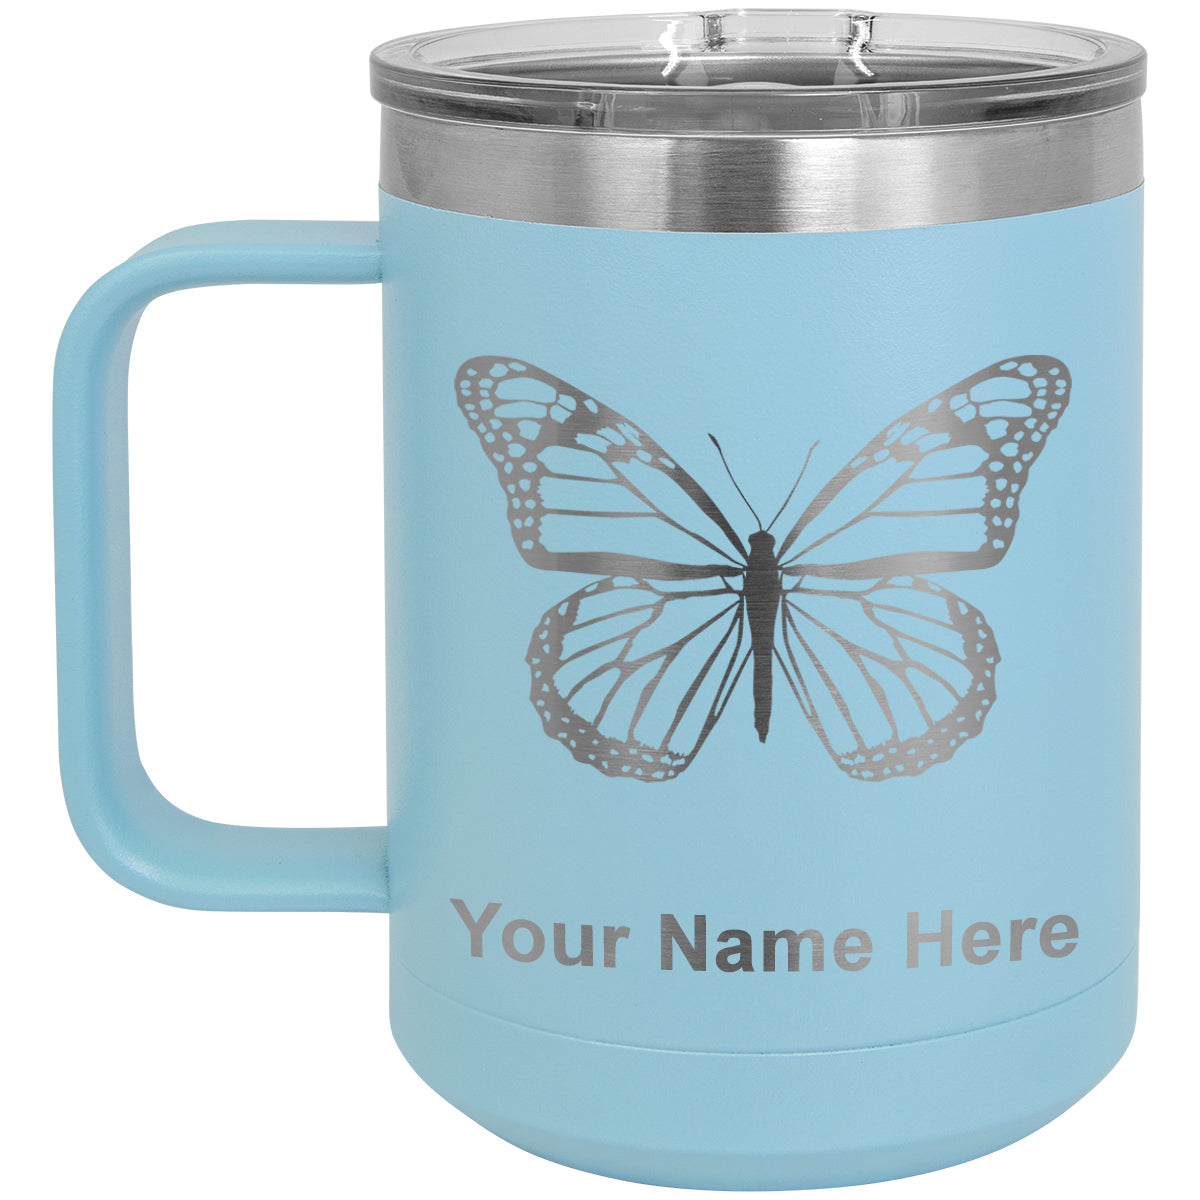 15oz Vacuum Insulated Coffee Mug, Monarch Butterfly, Personalized Engraving Included